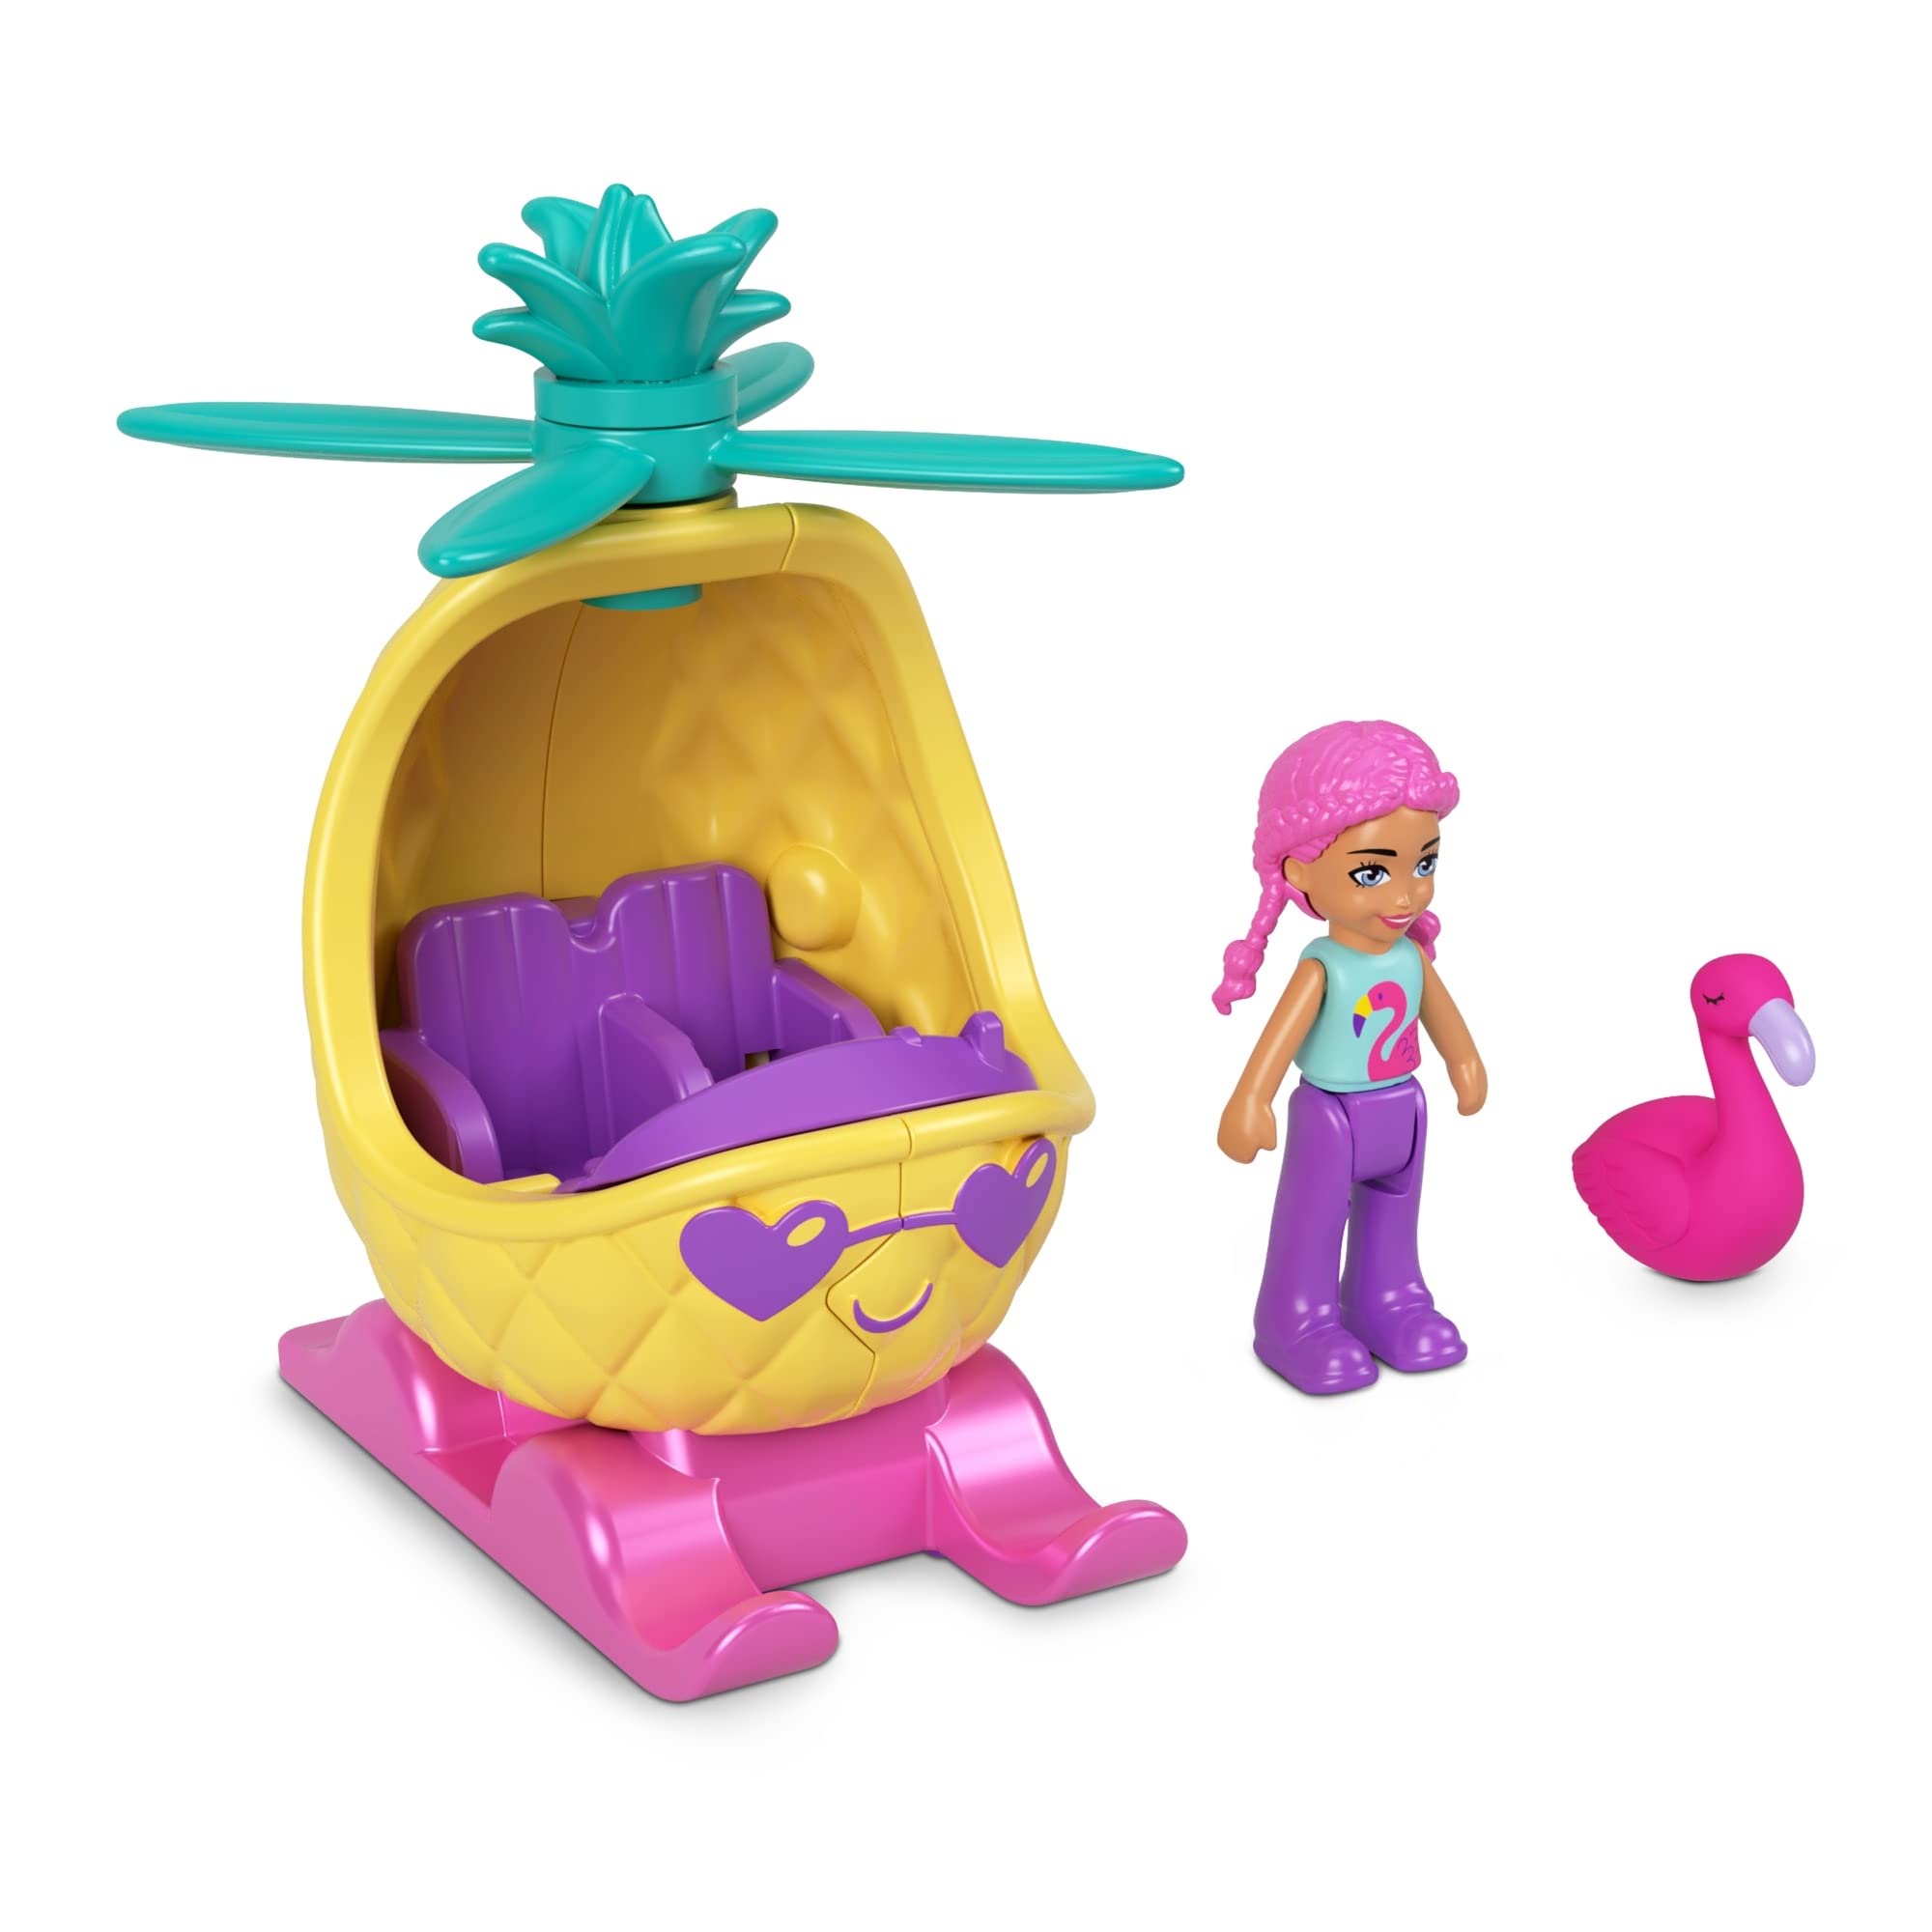 Polly Pocket Collectible Micro Mini Metal Vehicle, Poseable Doll and Pet Set - Polly's Friend Doll with Pineapple Helicopter and Hot Pink Flamingo Sidekick Playset